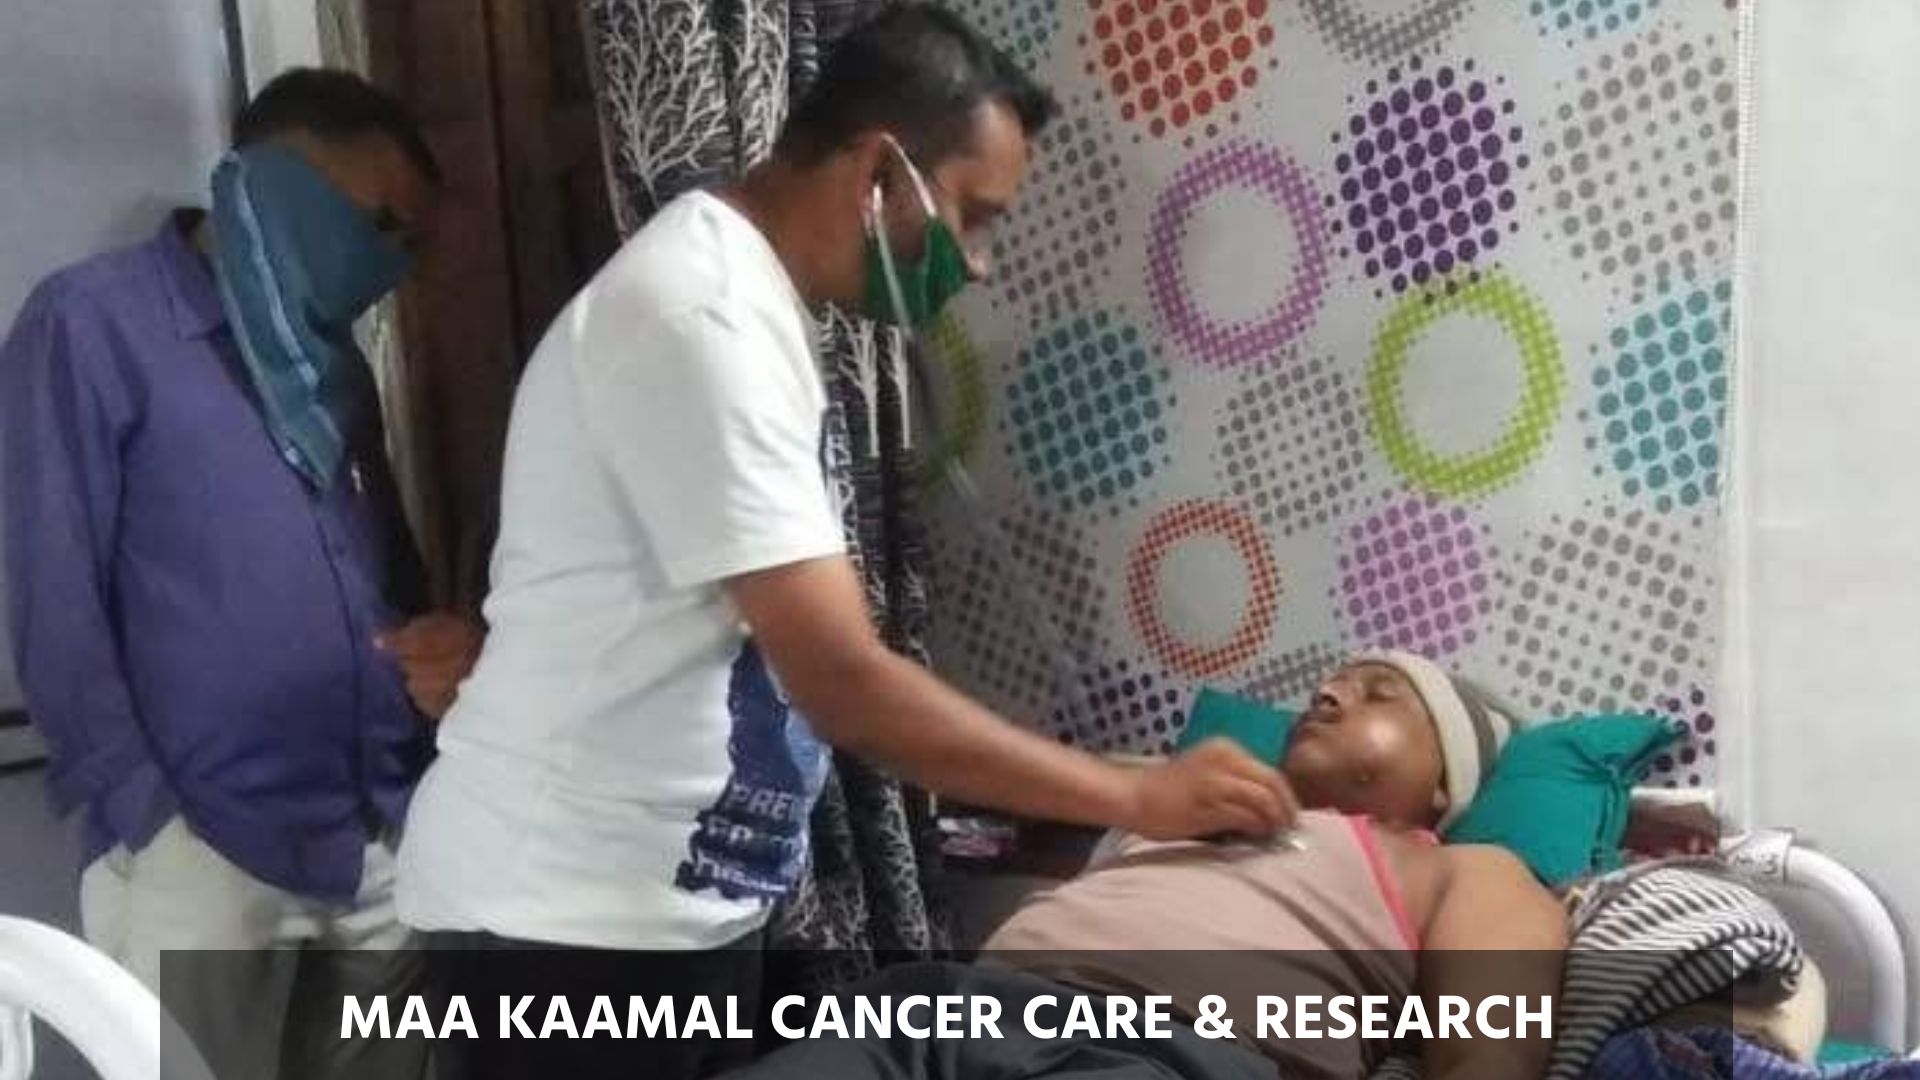 Maa Kaamal Cancer Care & Research with Patient 2